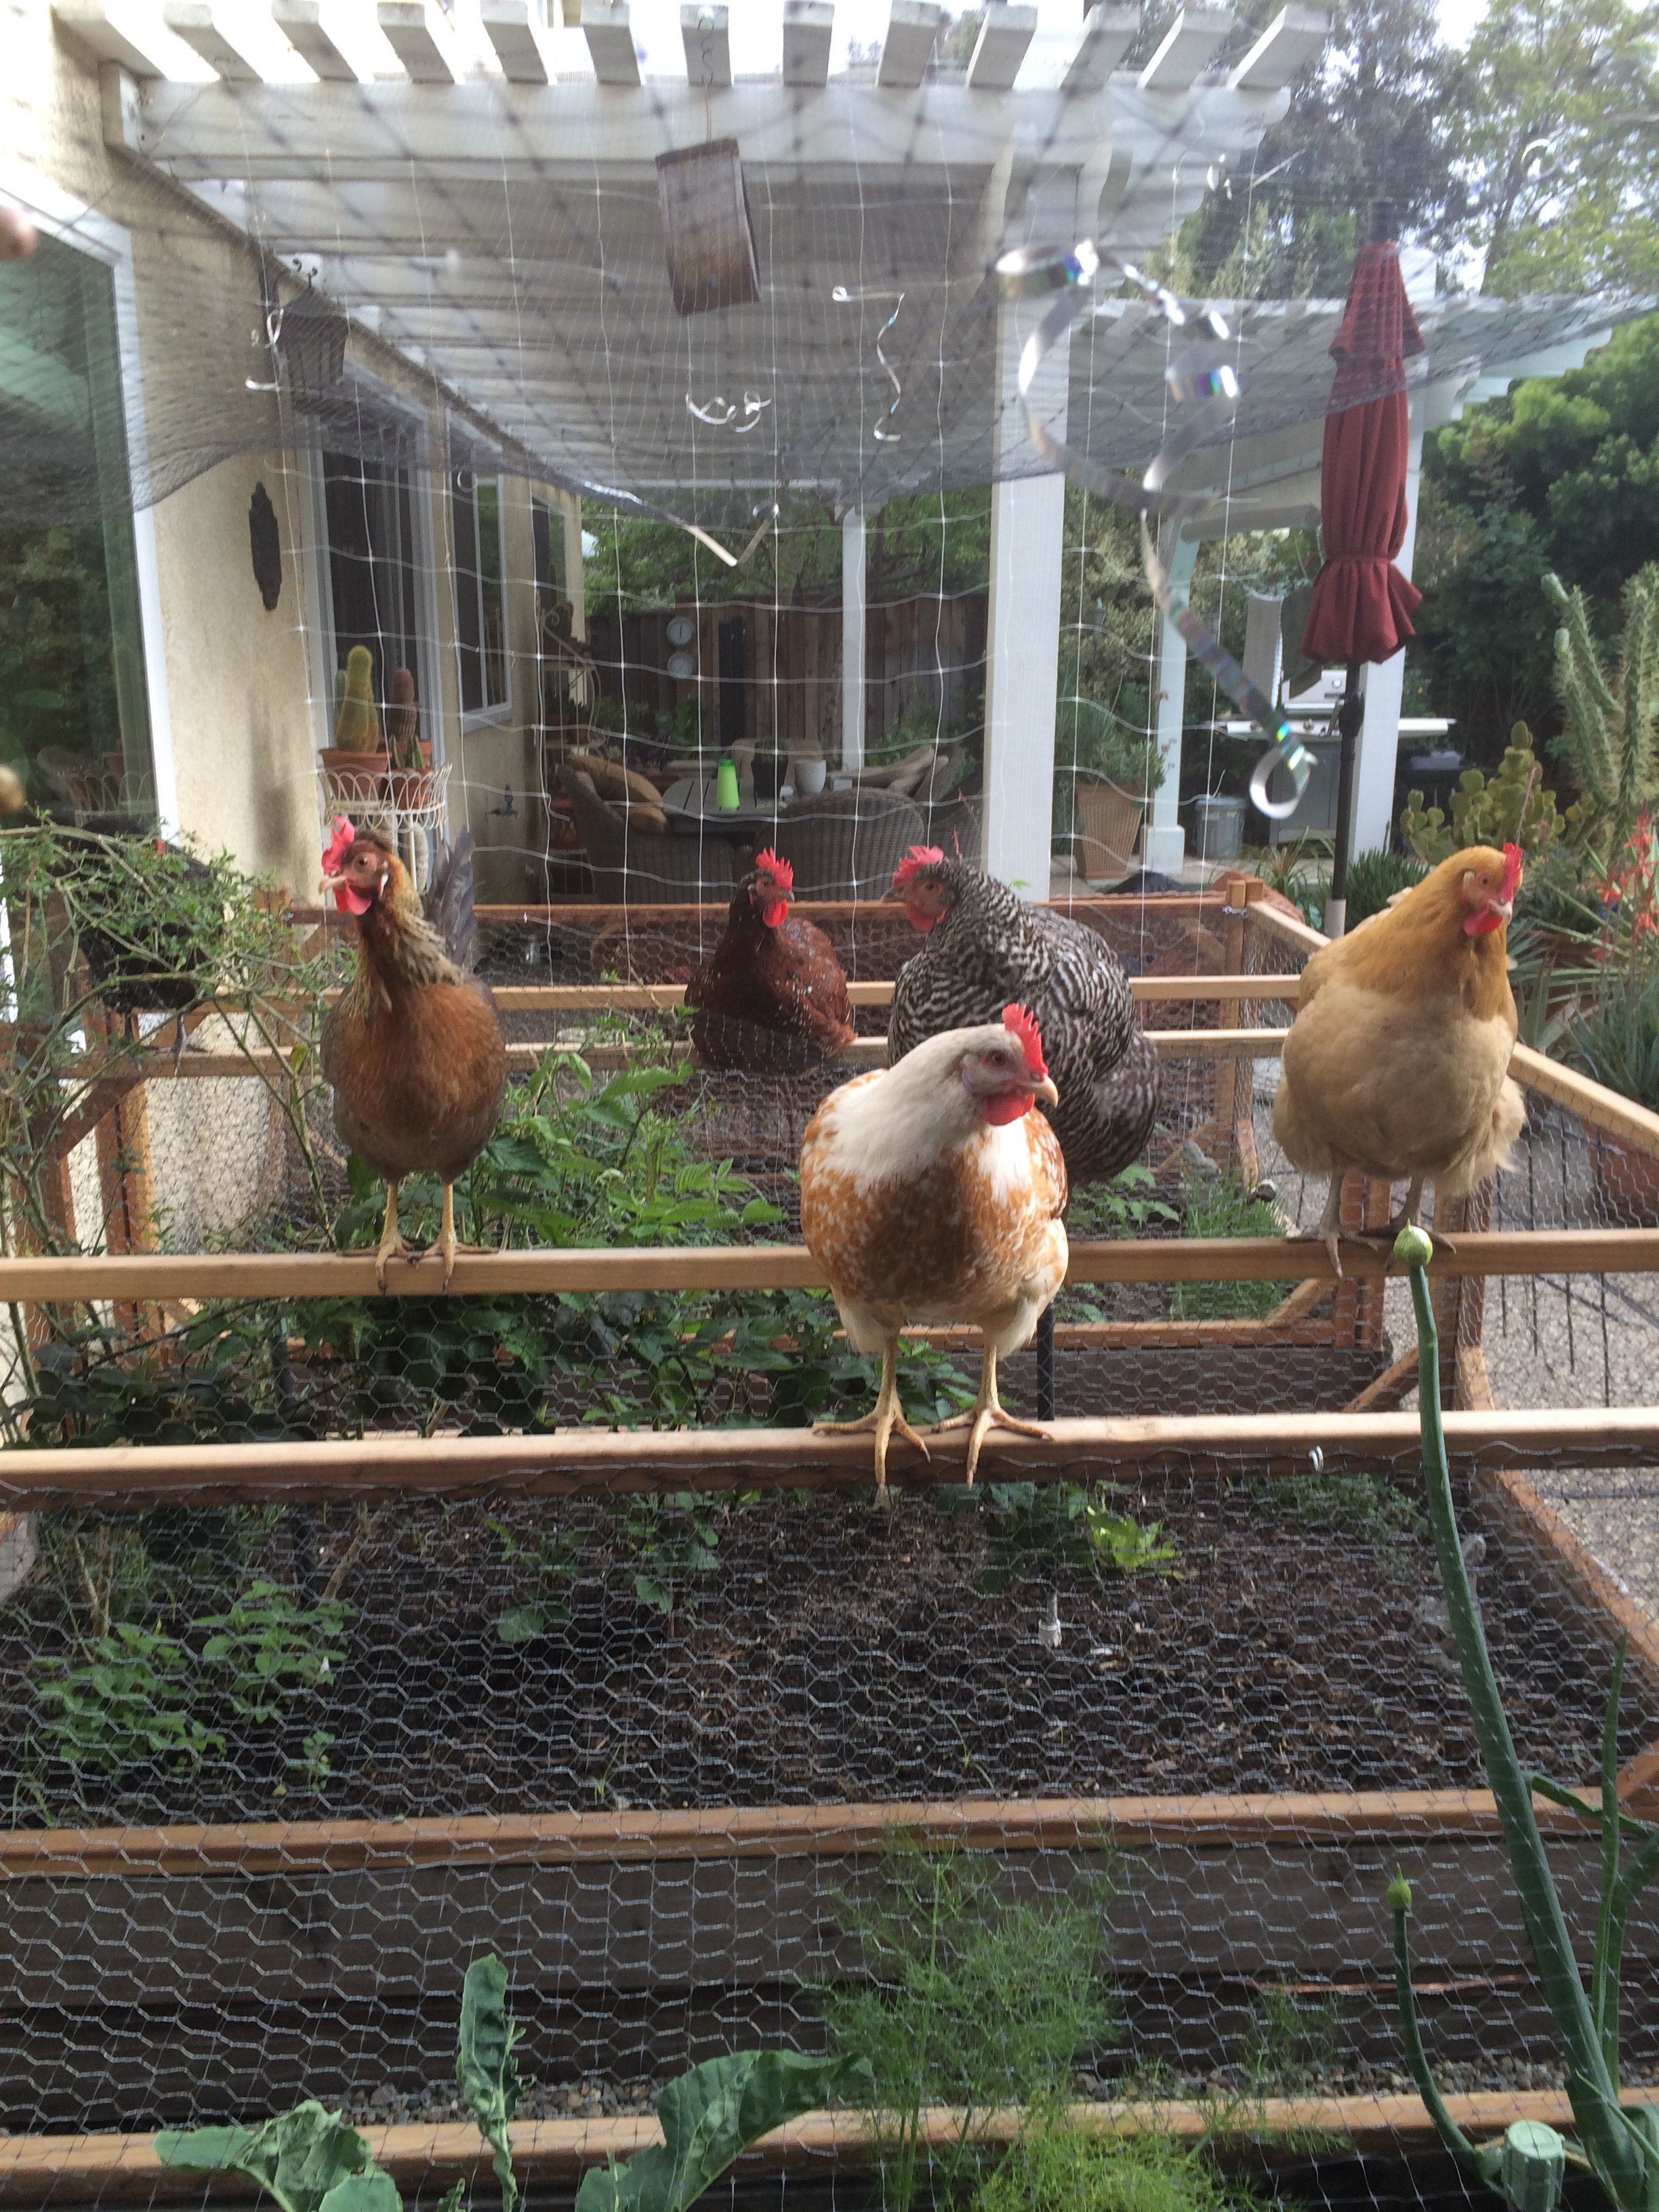 Poultry jungle gym.